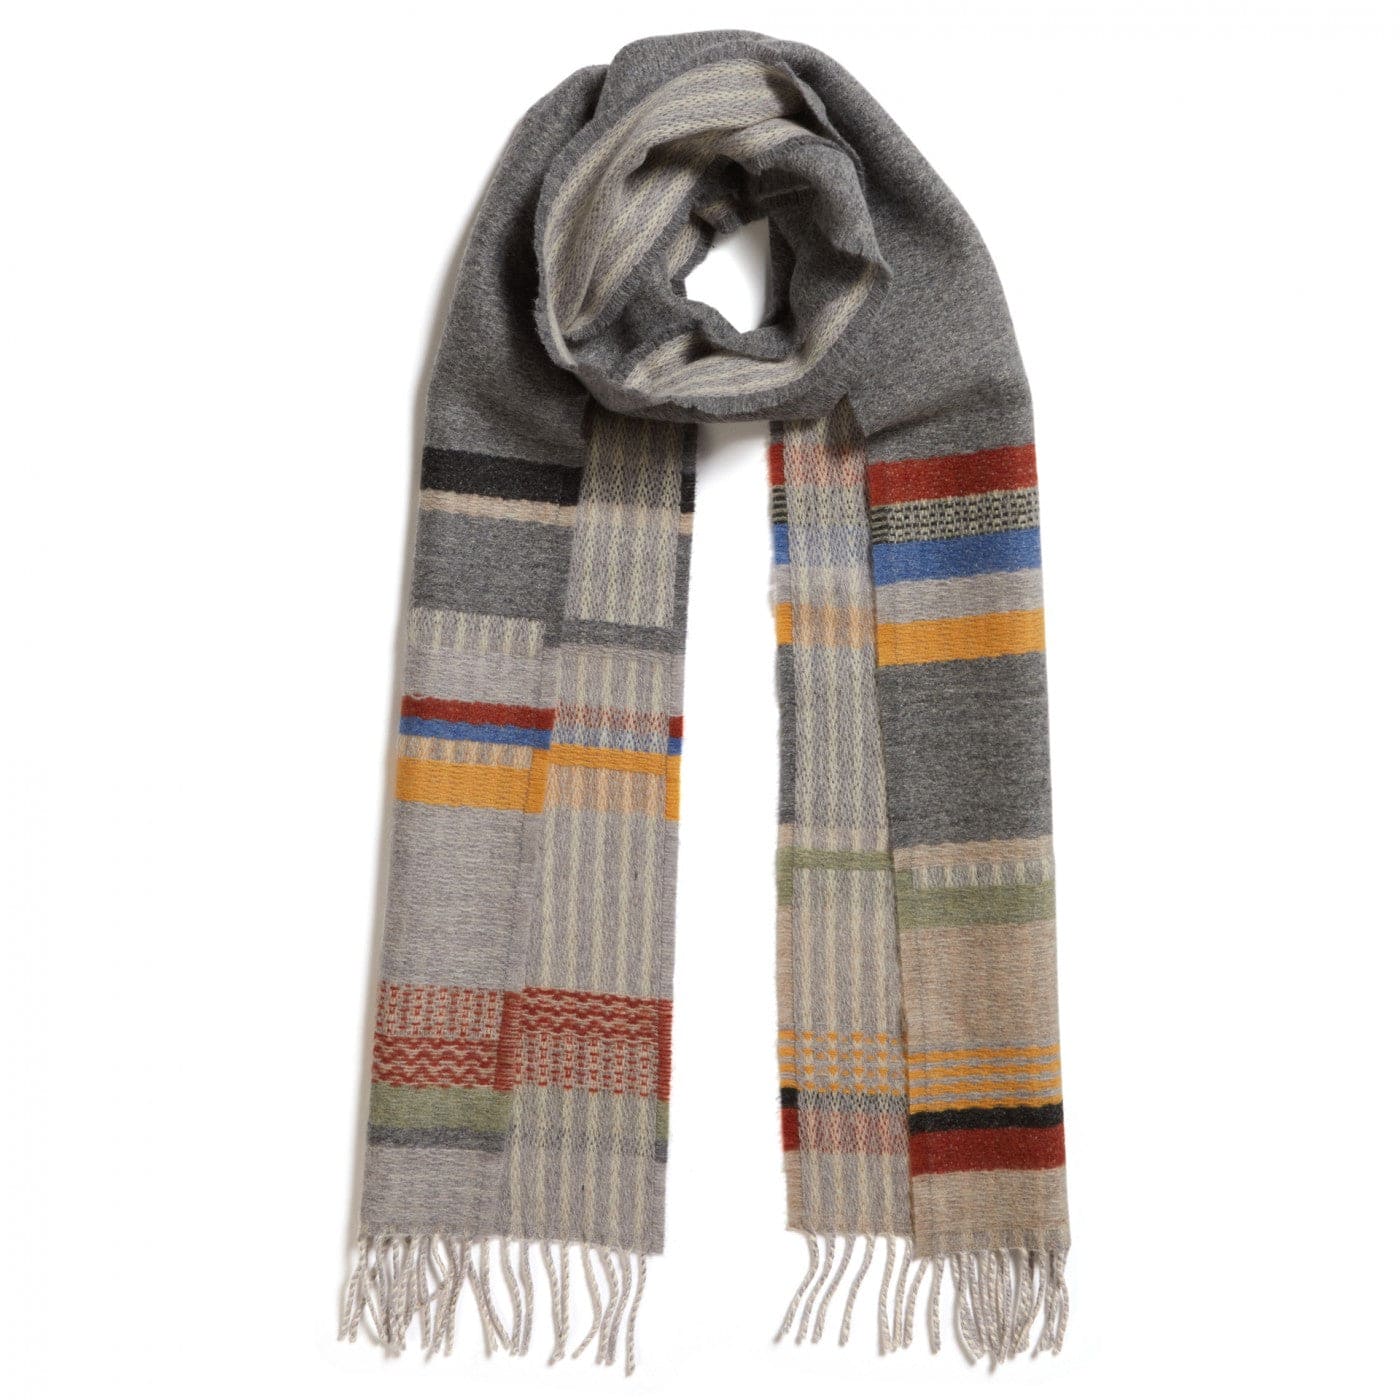 WALLACE+SEWELL - SCARF - DARLAND - GREY